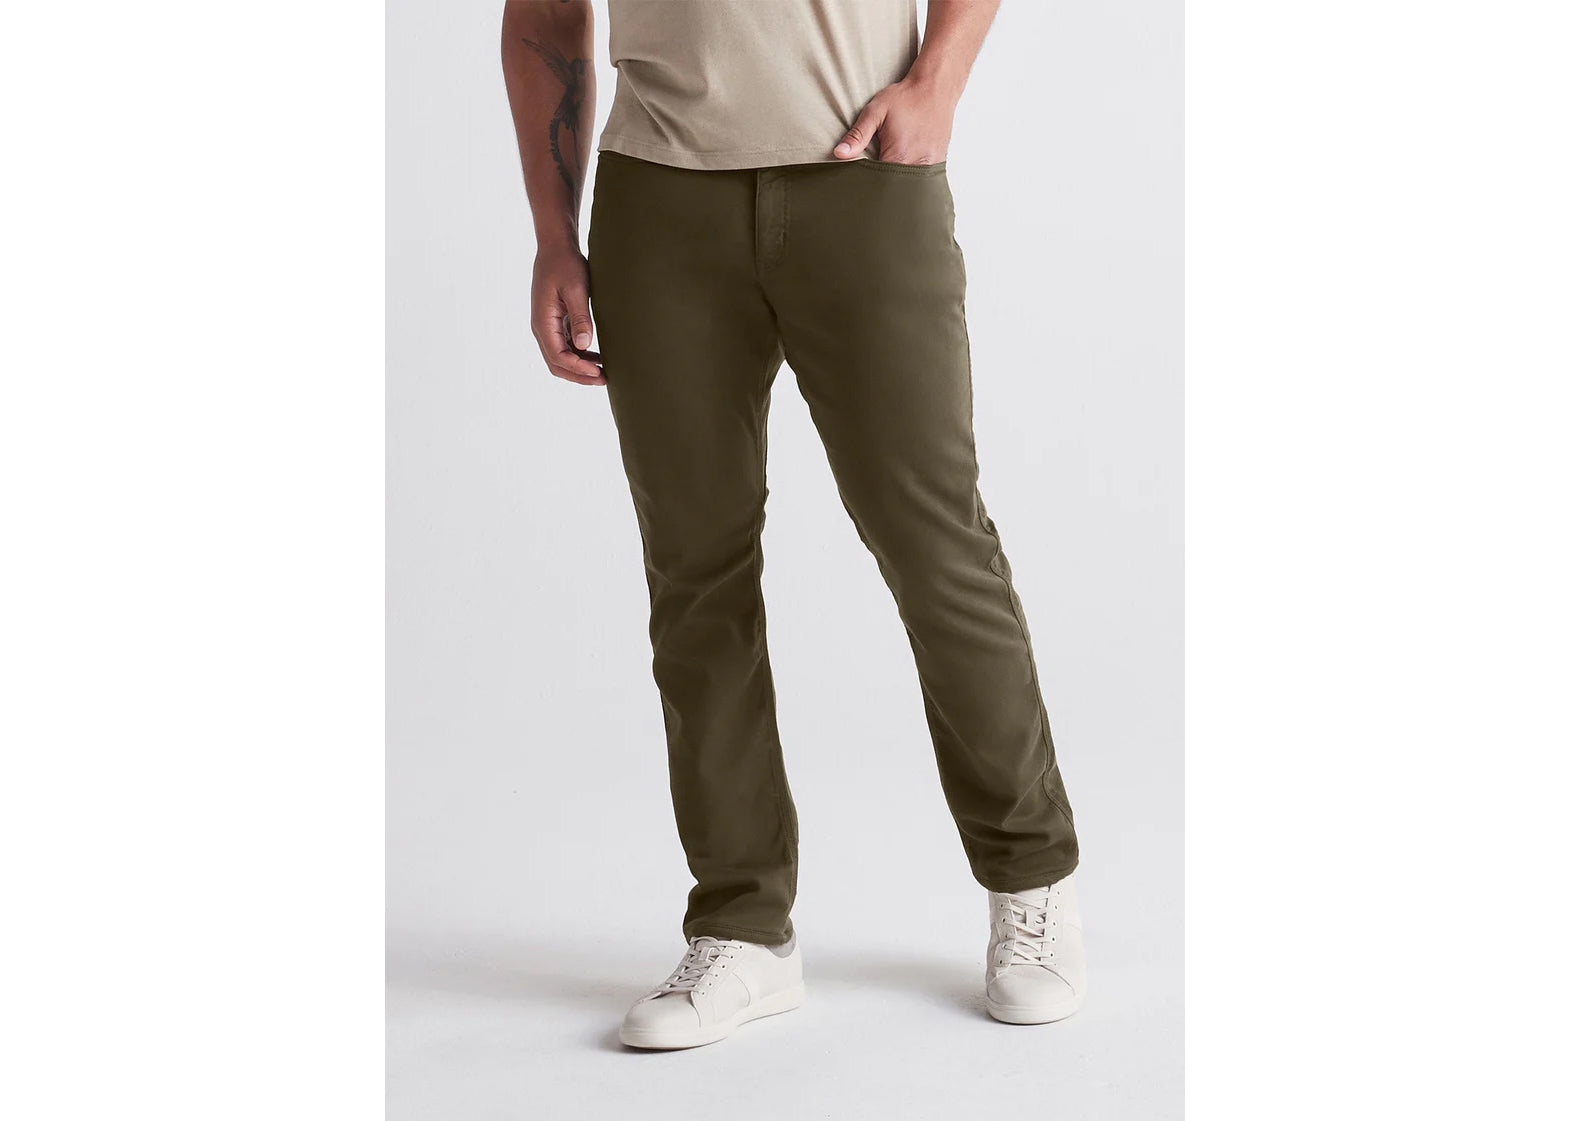 PrAna Performance Stretch Brion II Pants | CoolSprings Galleria